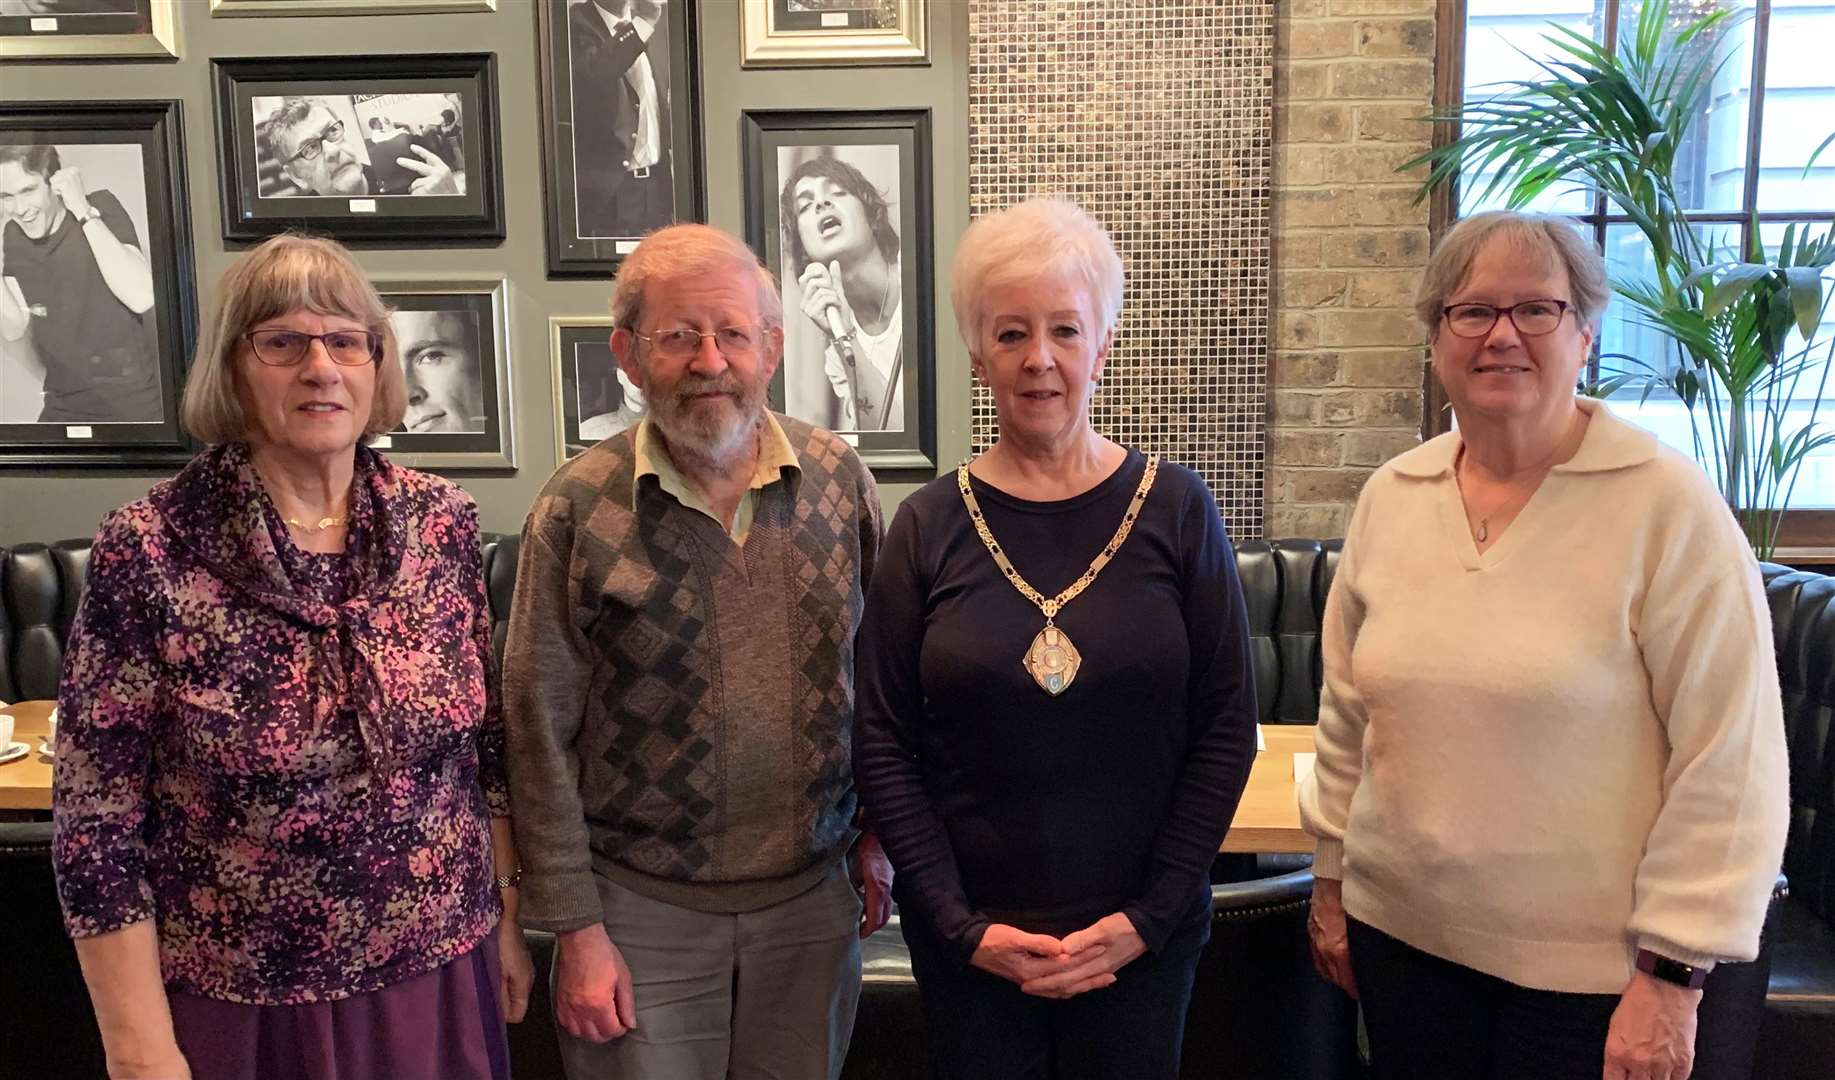 Committee members at a recent meeting – (from left) Hilary Mackay, David Corner, Linda Stuart and Cath Tod. Those missing from the photo are Christine Macleod, Callum Macleod and Jean Currie.